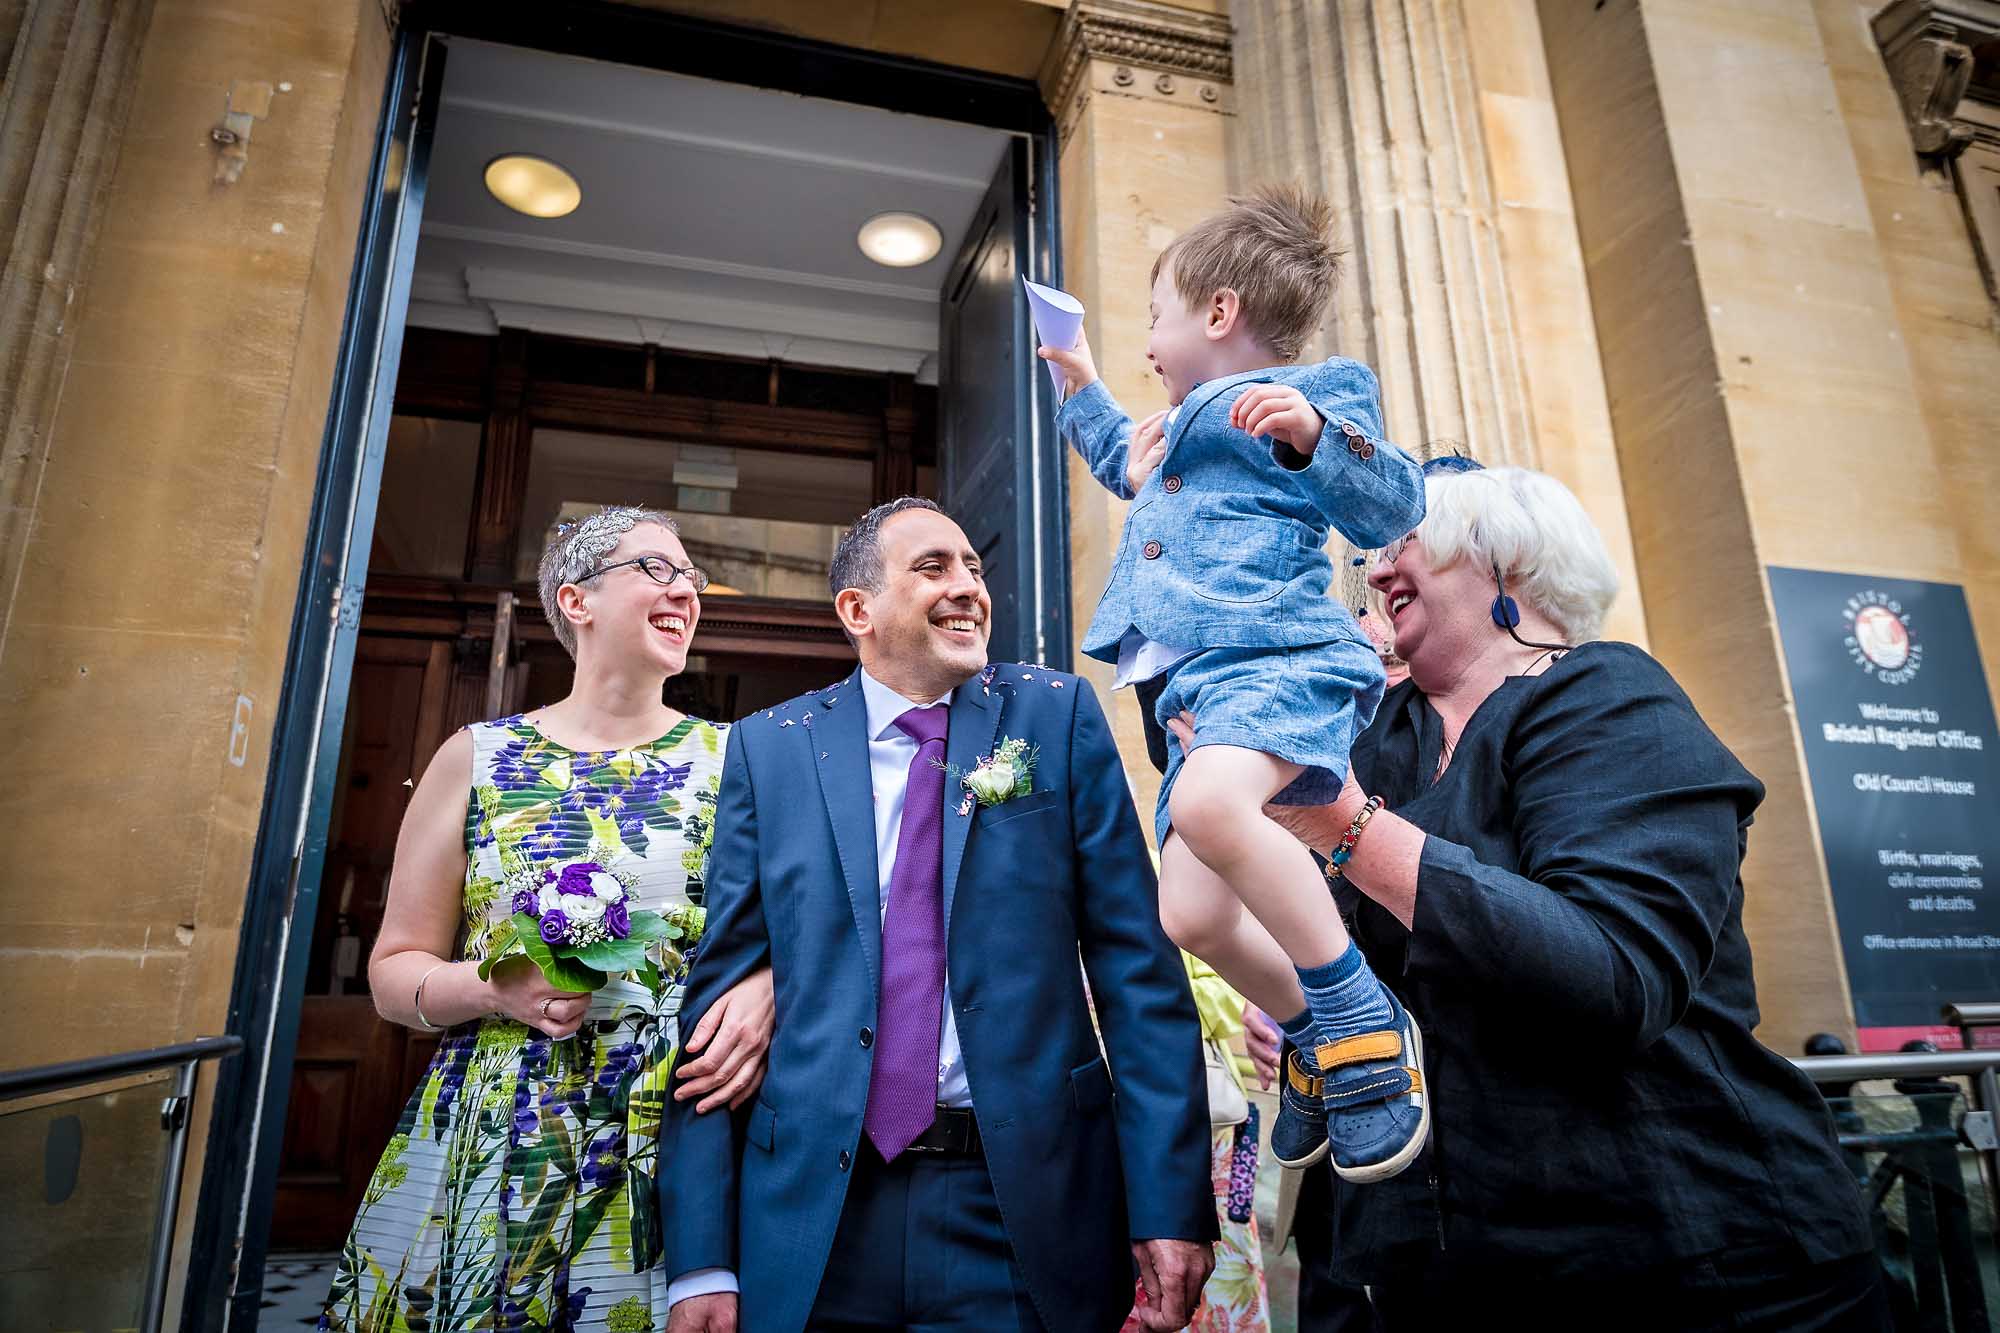 Little boy being held about to pour confetti on newly-weds in Bristol